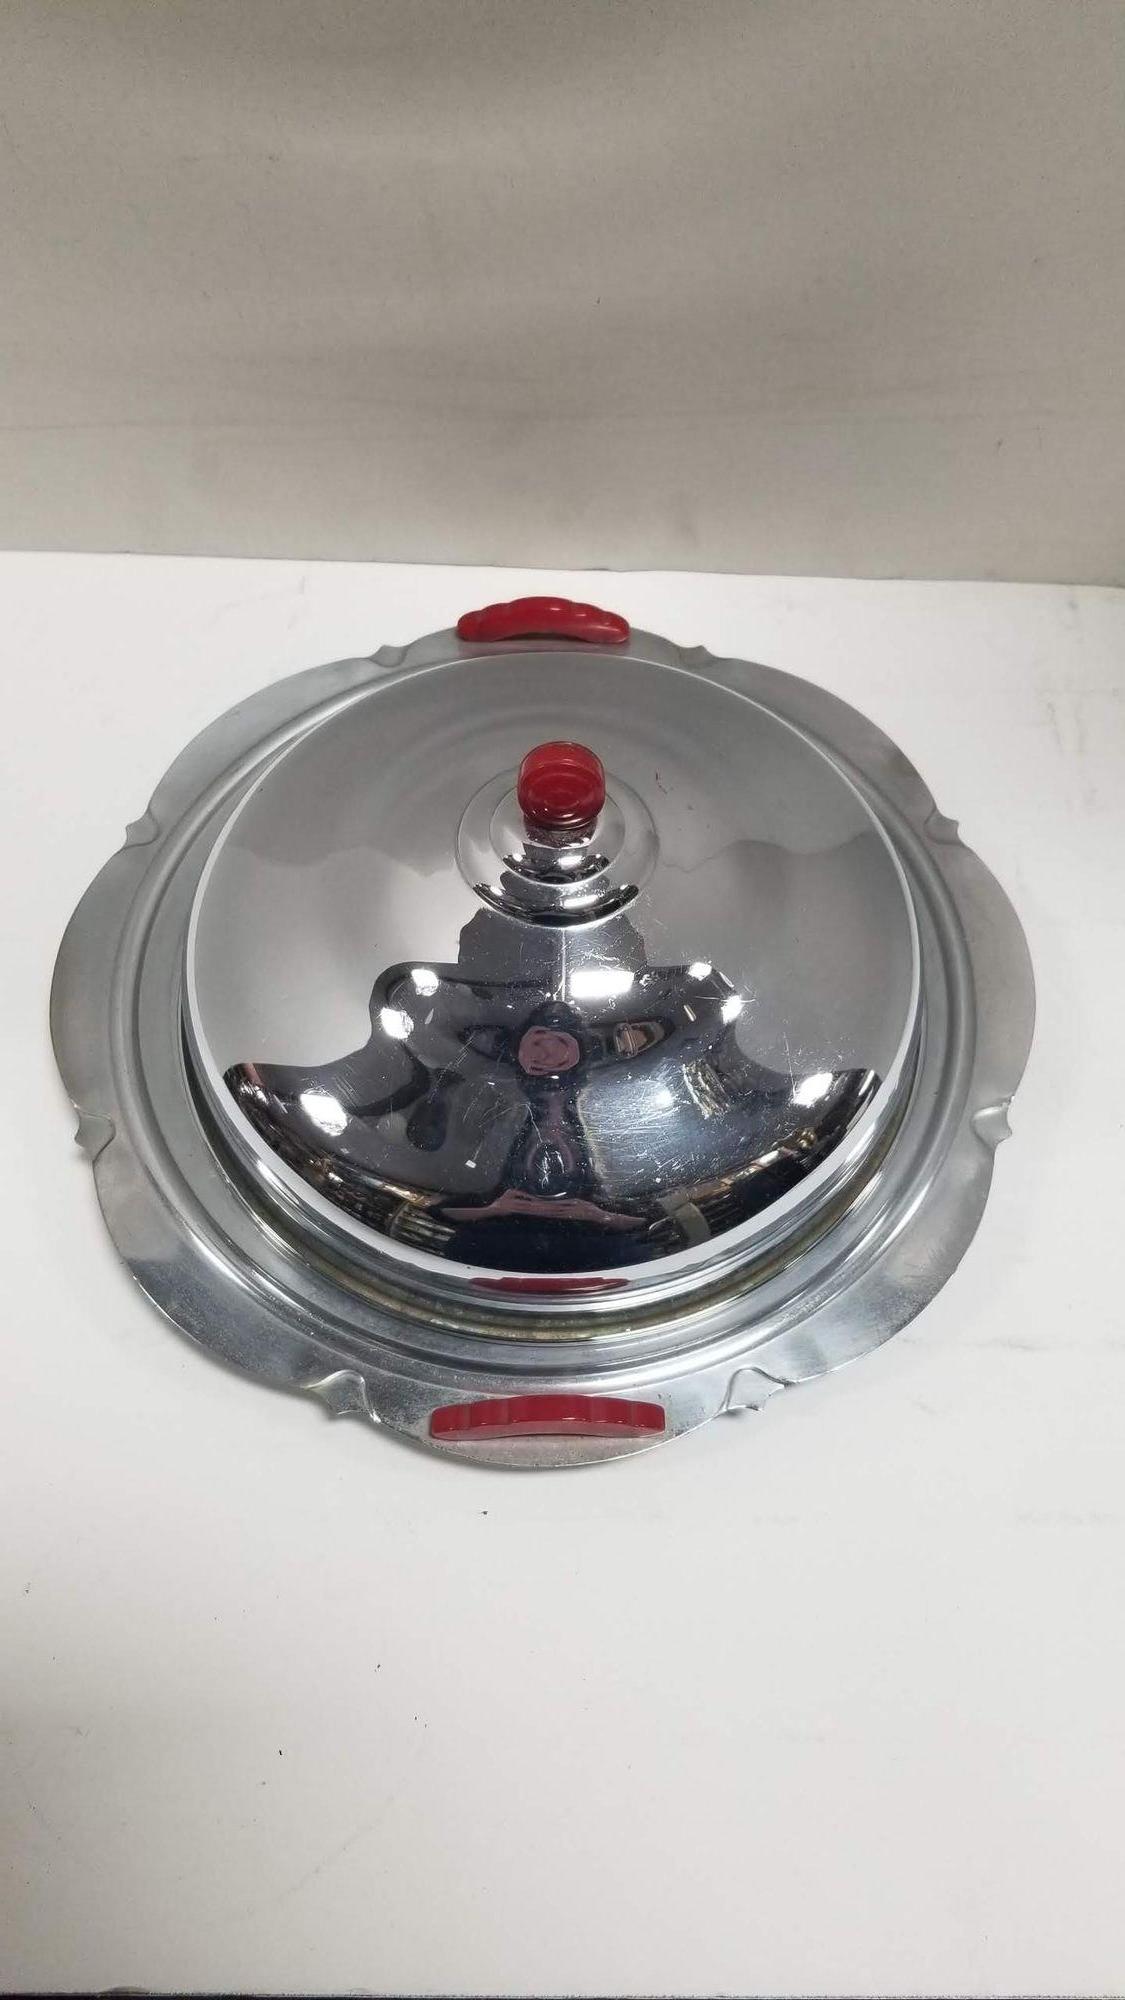 Midcentury era chromed steel serving tray with red handles and lid top
This midcentury serving tray exudes elegance and sophistication. The gleaming surface adds a touch of luxury to any occasion. Whether you're entertaining guests or simply